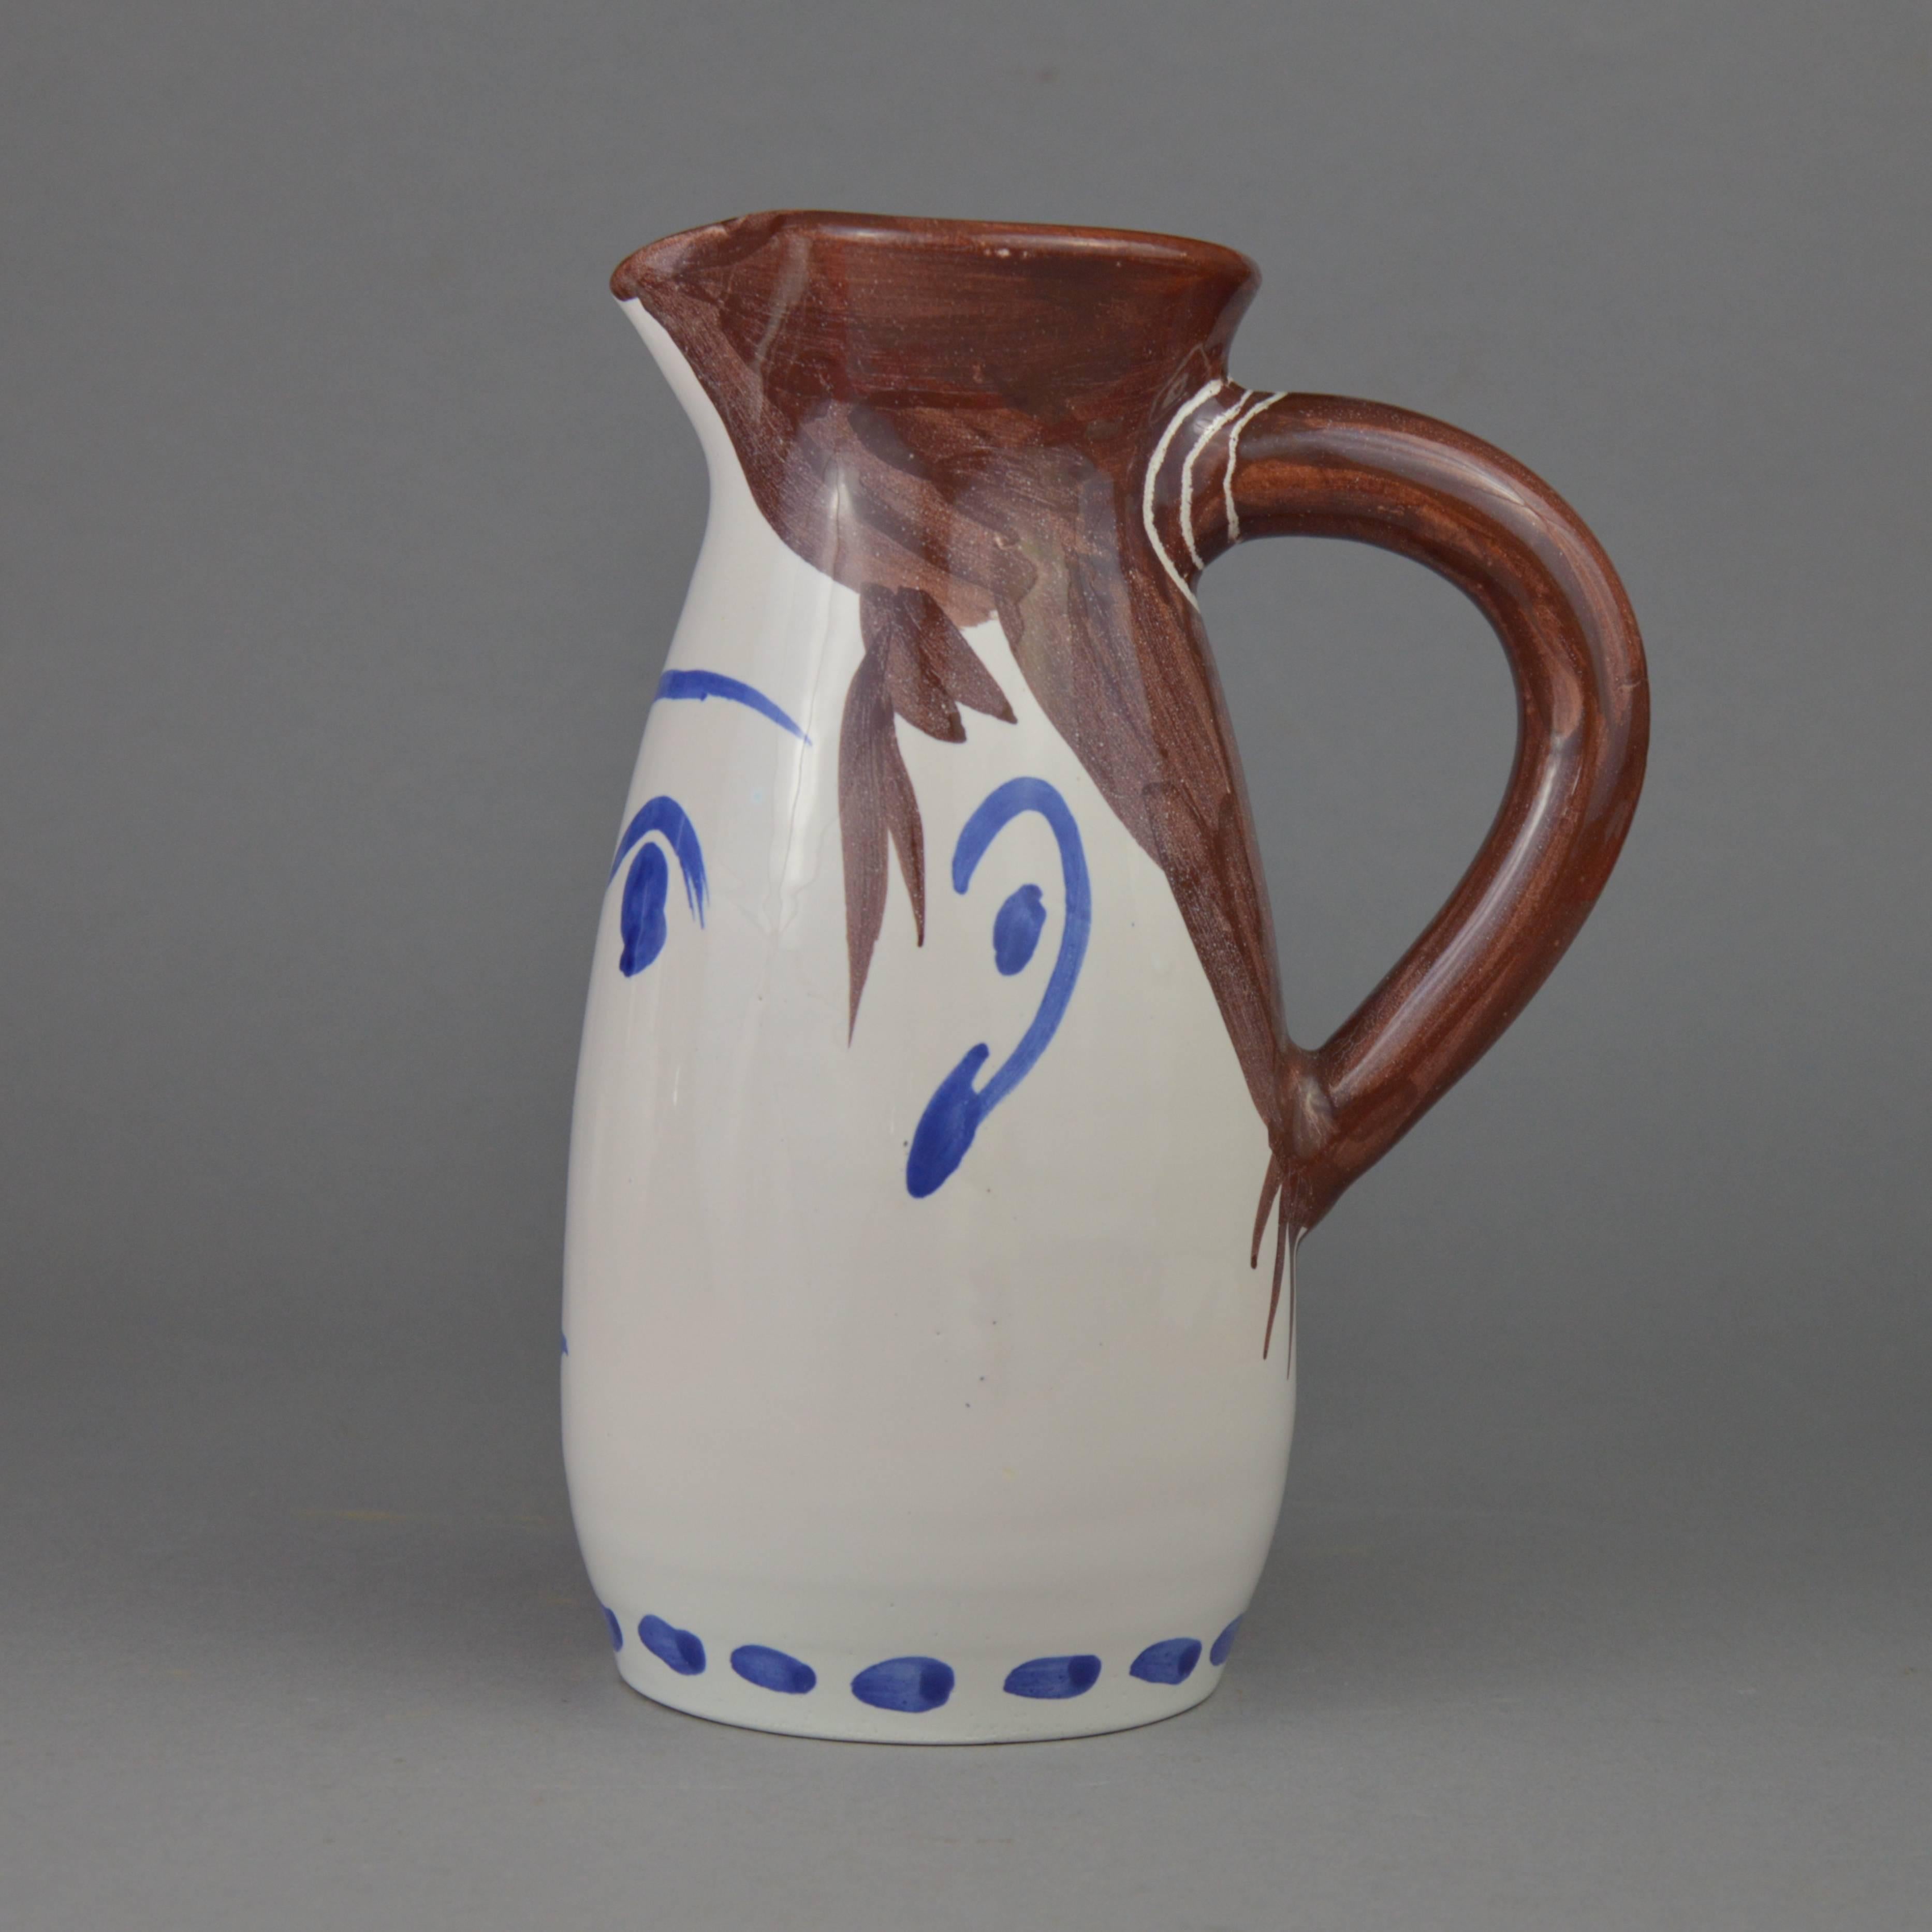 Pablo Picasso turned ceramic face tankard. White earthenware clay, oxides and white decoration. Executed in an edition of 300 copies. Stamped 'Edition Picasso Madoura/Madoura Plein Feu/Edition Picasso'. Conceived in 1959. Literature: Alain Ramié